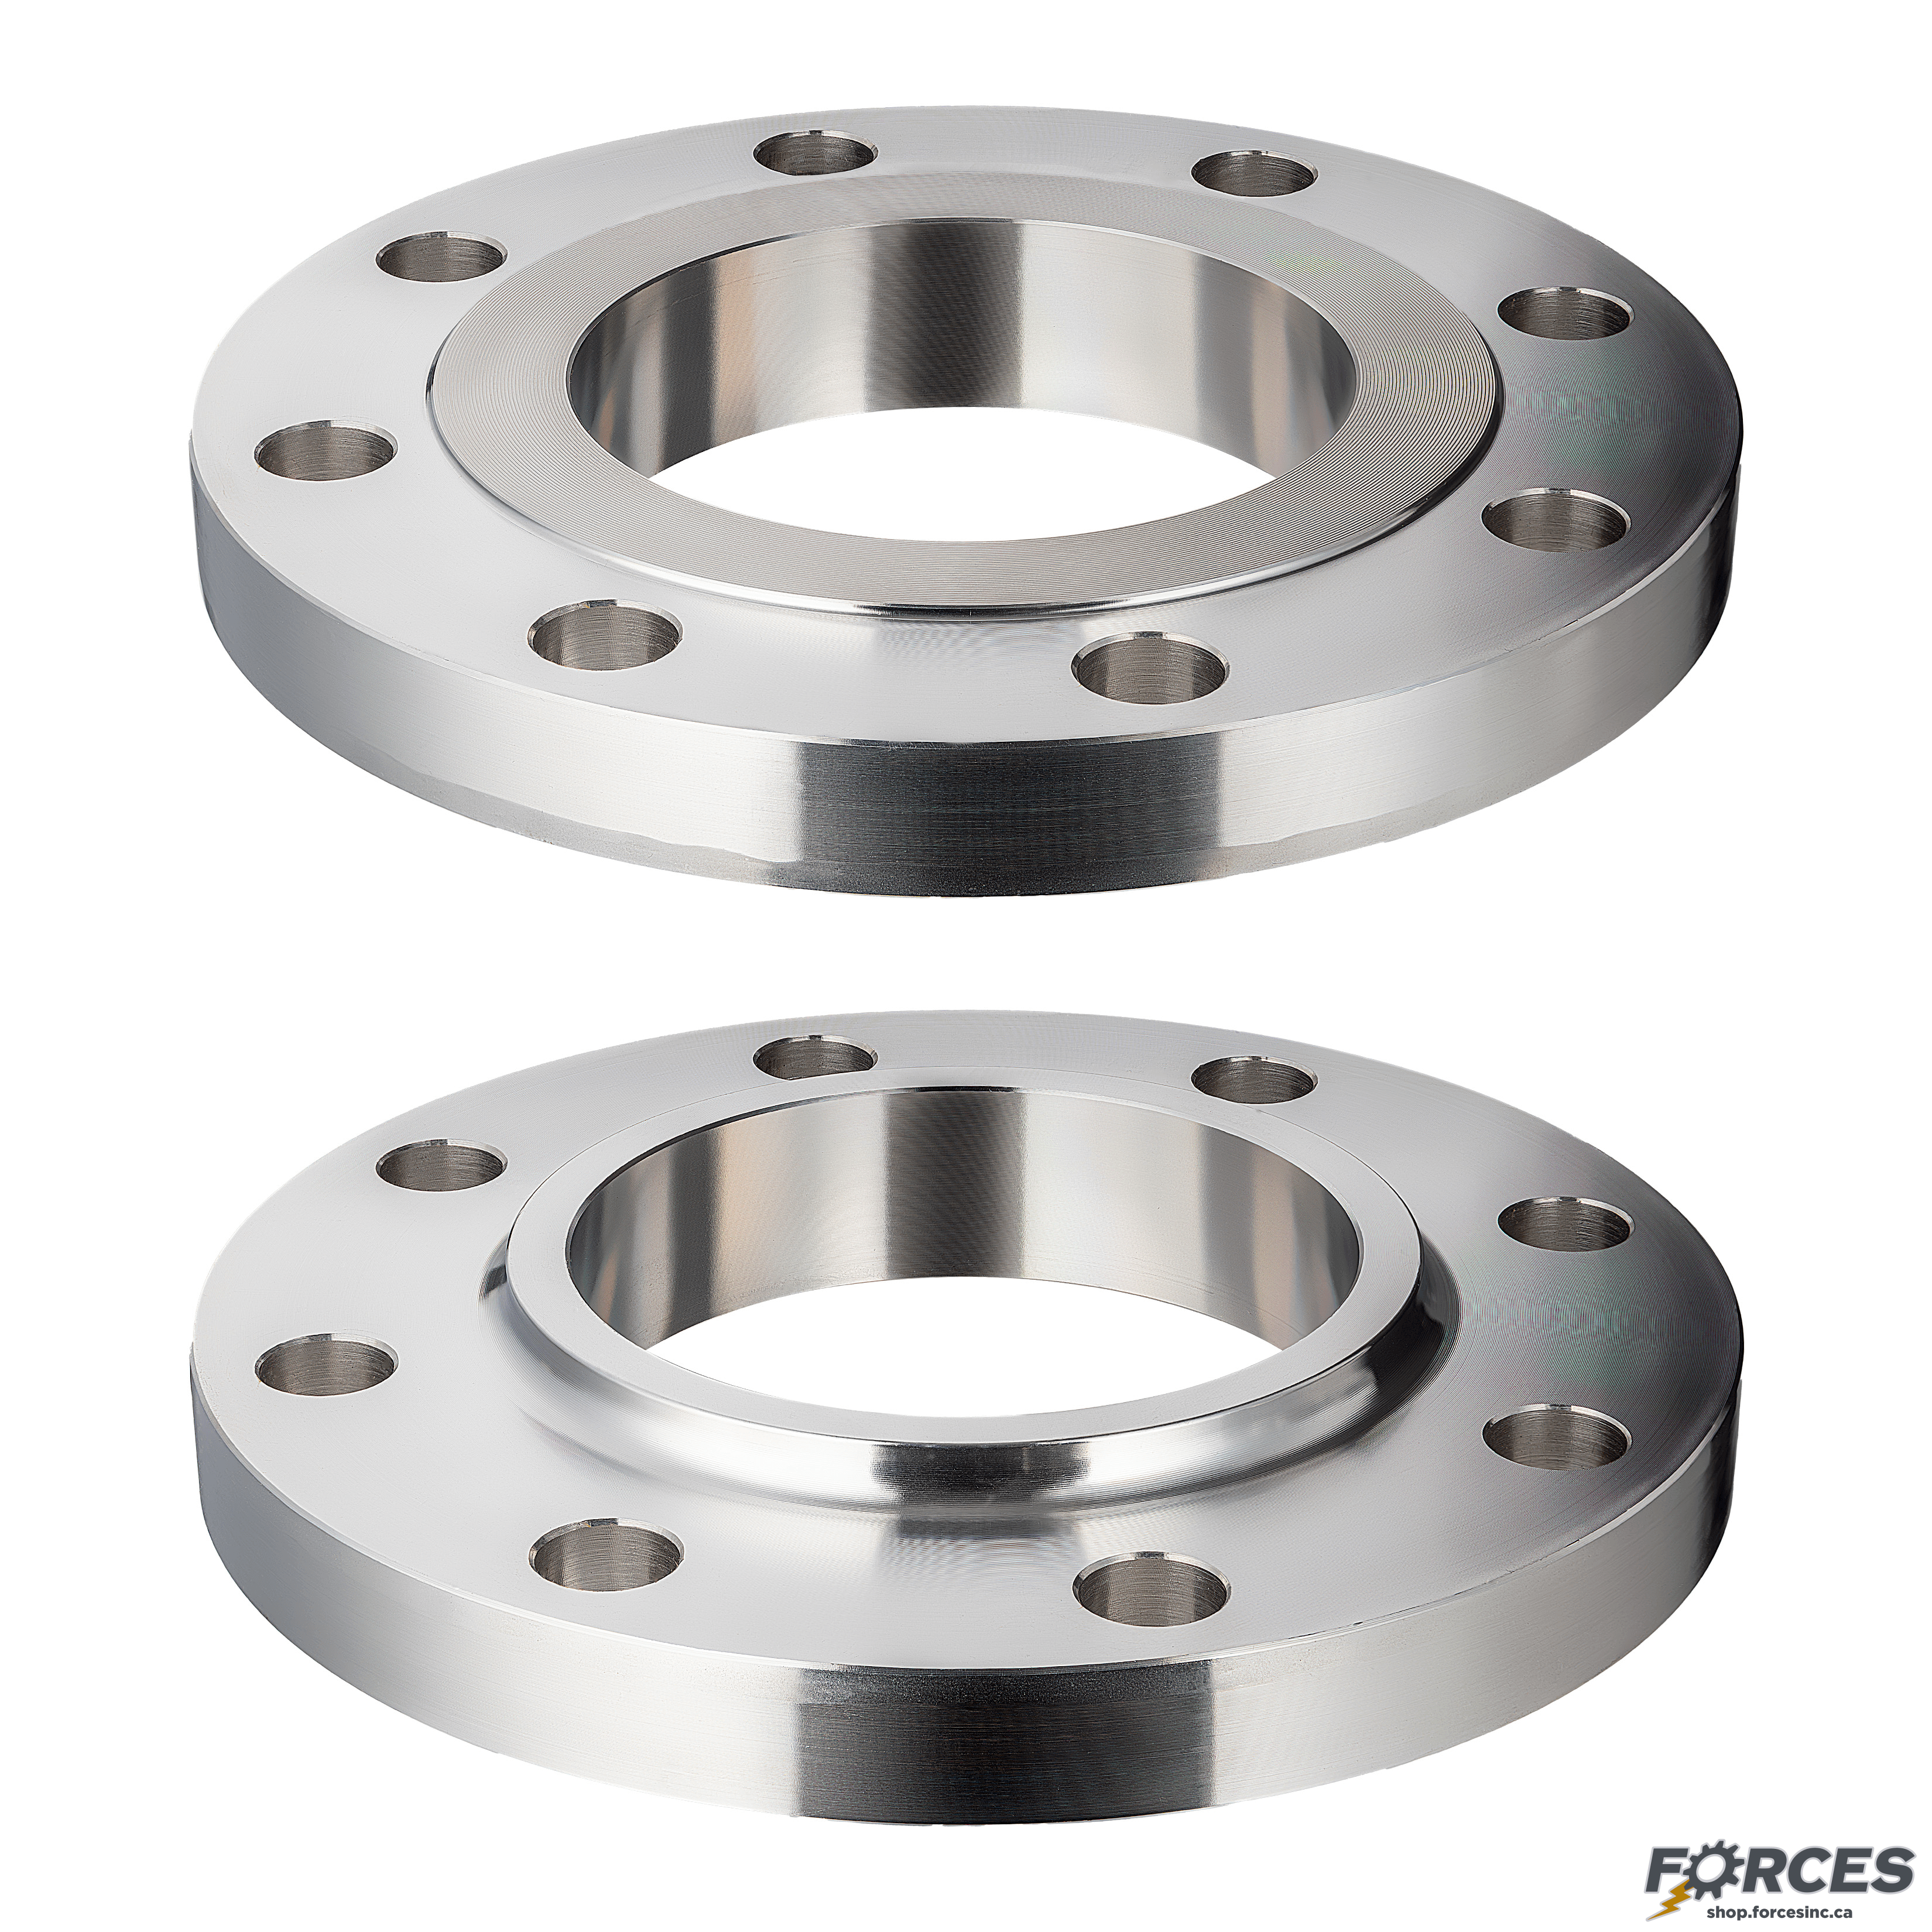 12" Slip-On Flange Class #150 - Stainless Steel 316 - Forces Inc